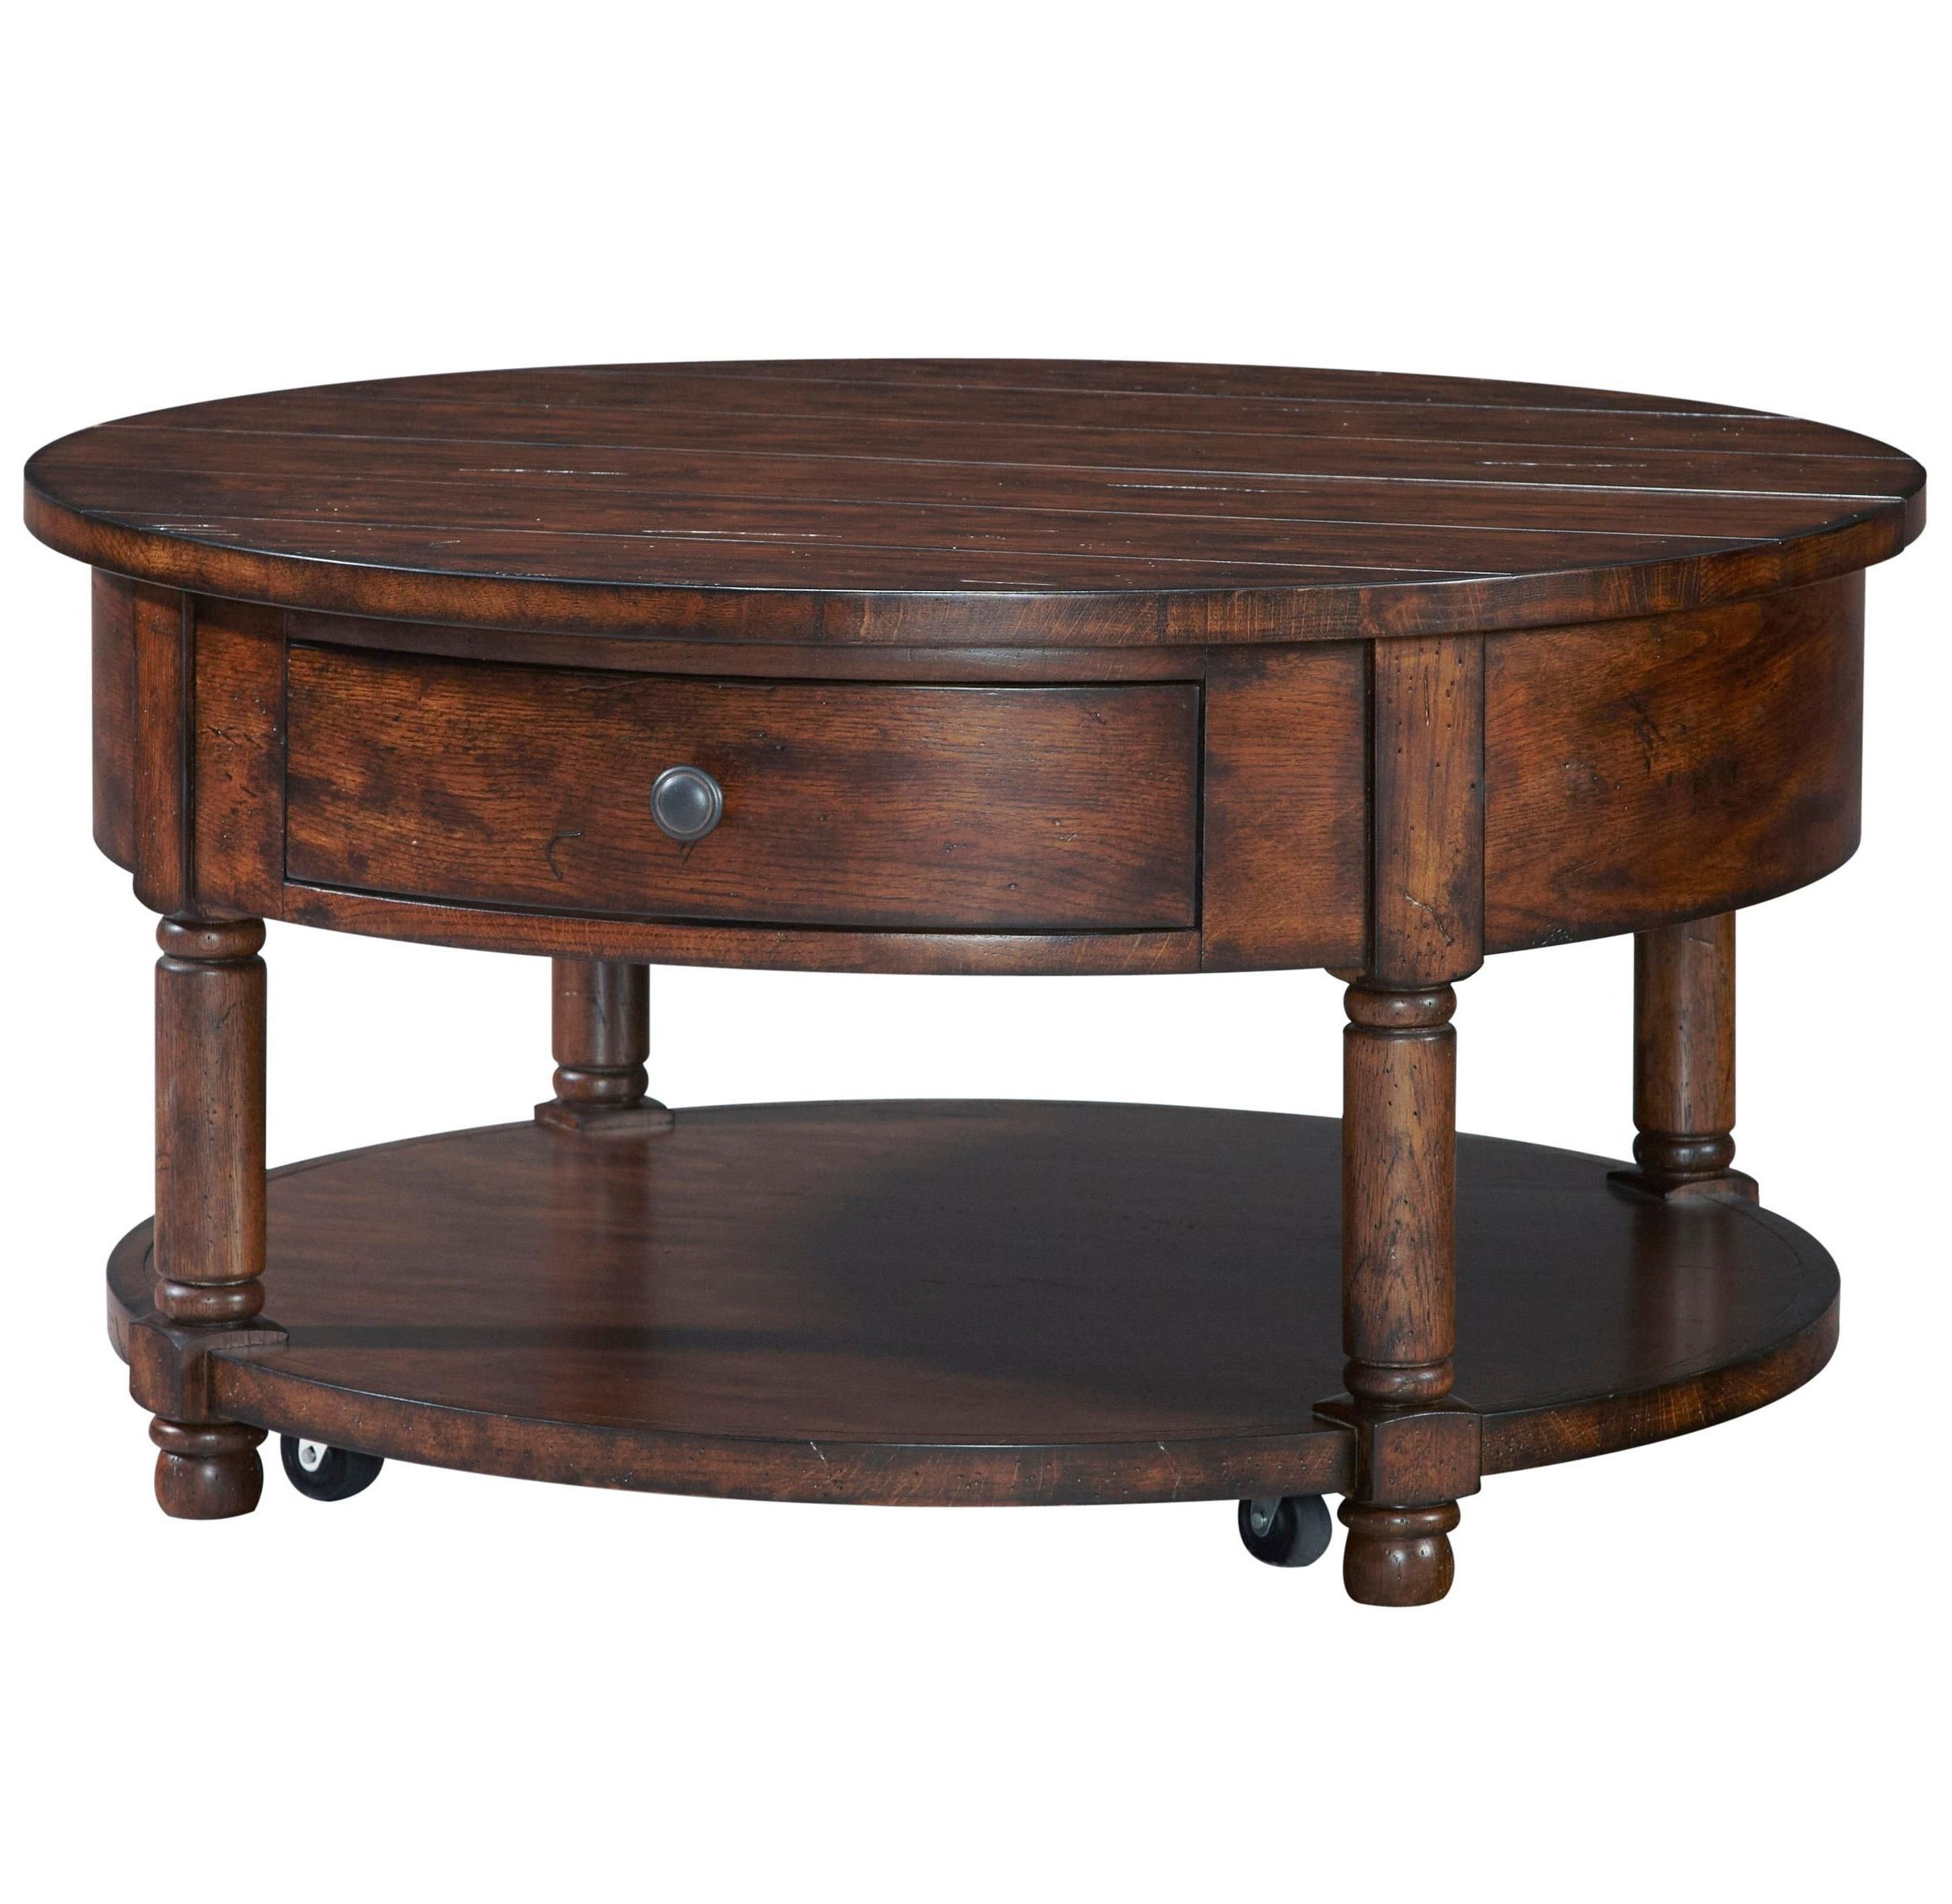 2018 Grant Lift Top Cocktail Tables With Casters Intended For Attic Heirlooms Round Lift Top Cocktail Tablebroyhill Furniture (Gallery 3 of 20)